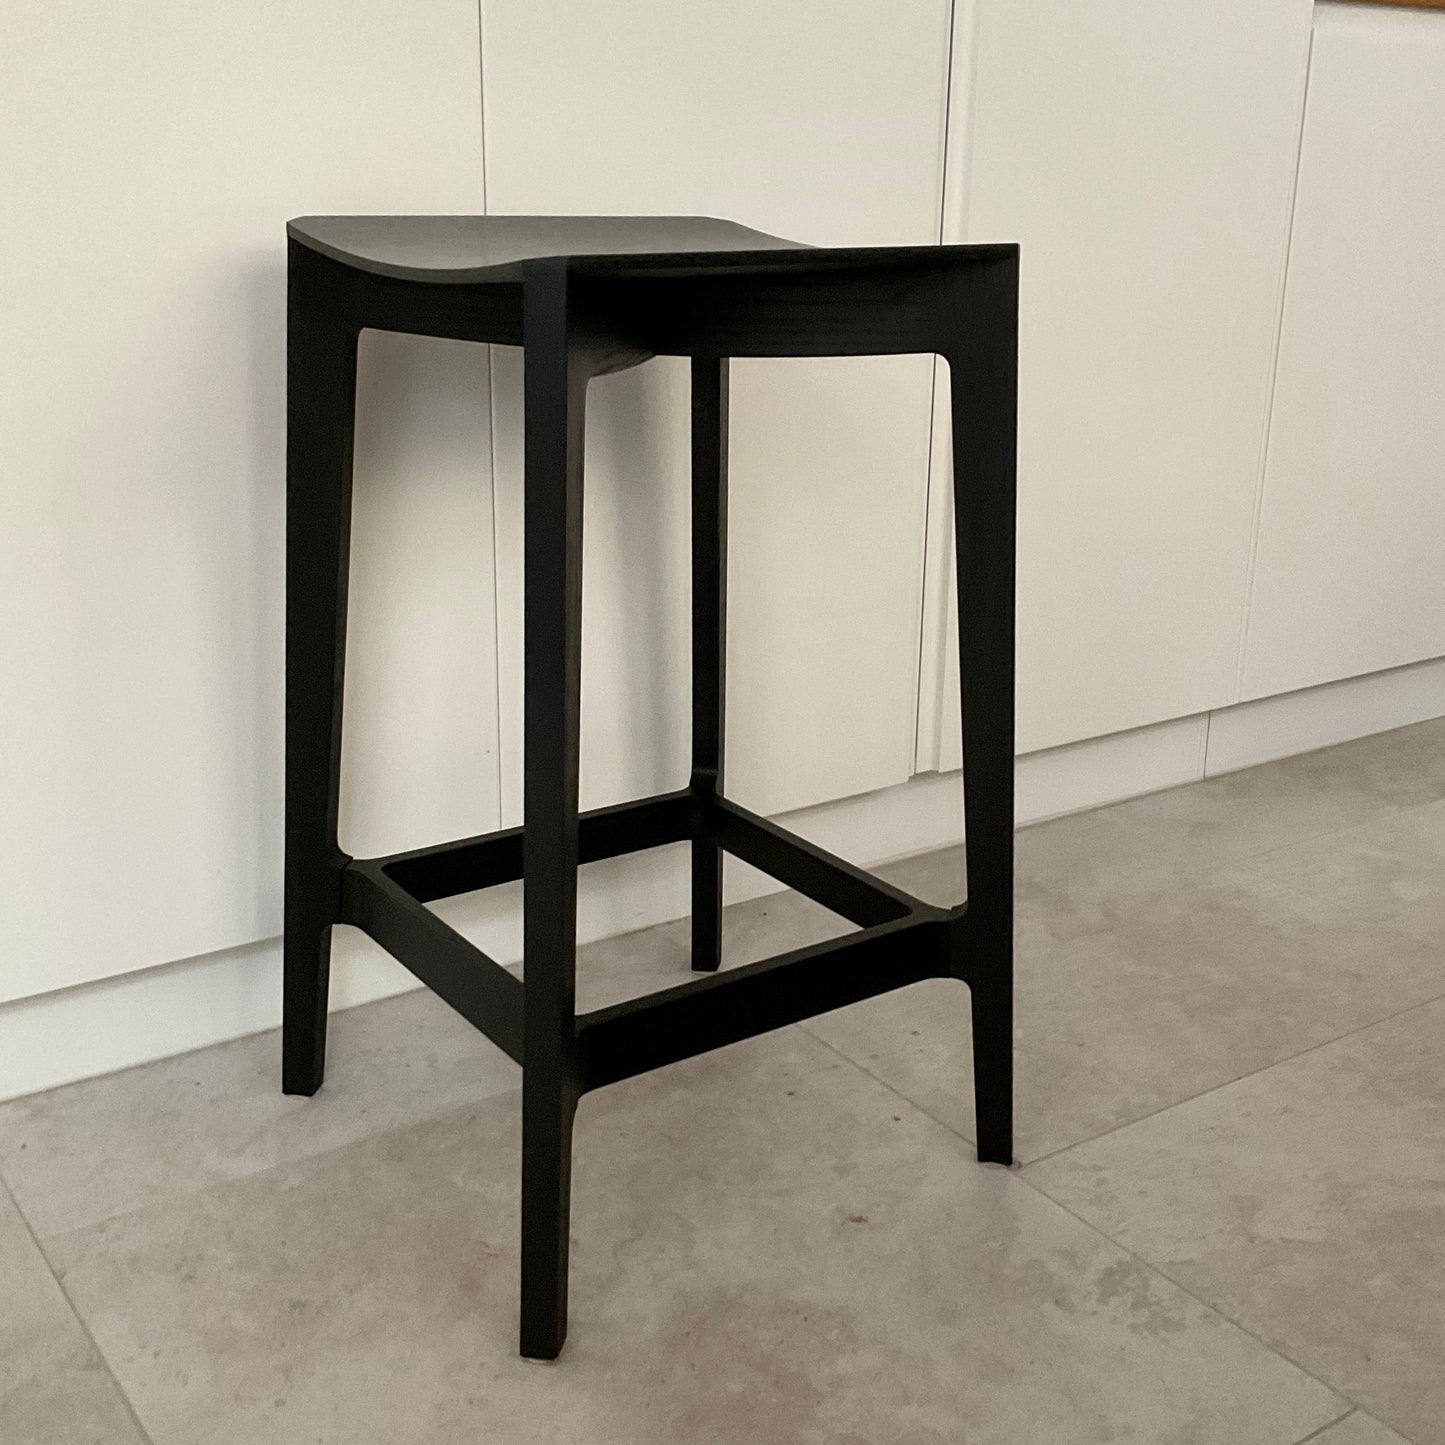 Elementary Stool by Jamie McLellan for Feel Good Designs (3 available)